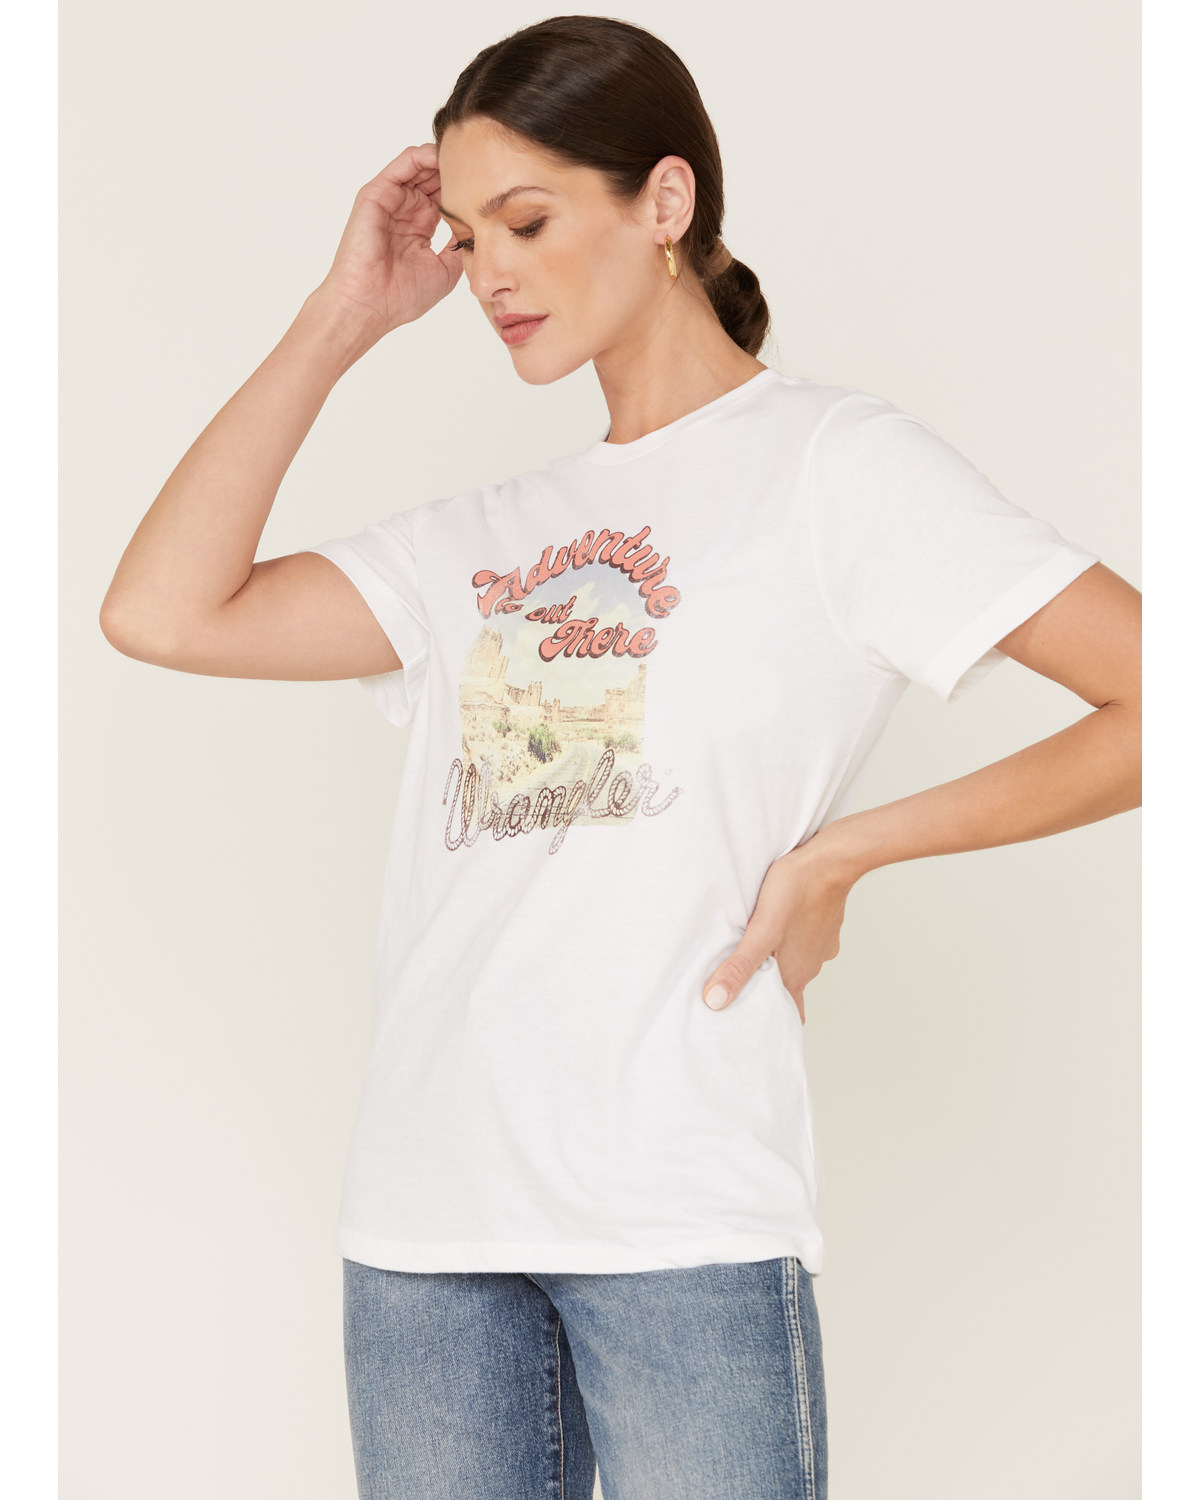 Wrangler Women's Adventure Is Out There Short Sleeve Graphic Tee